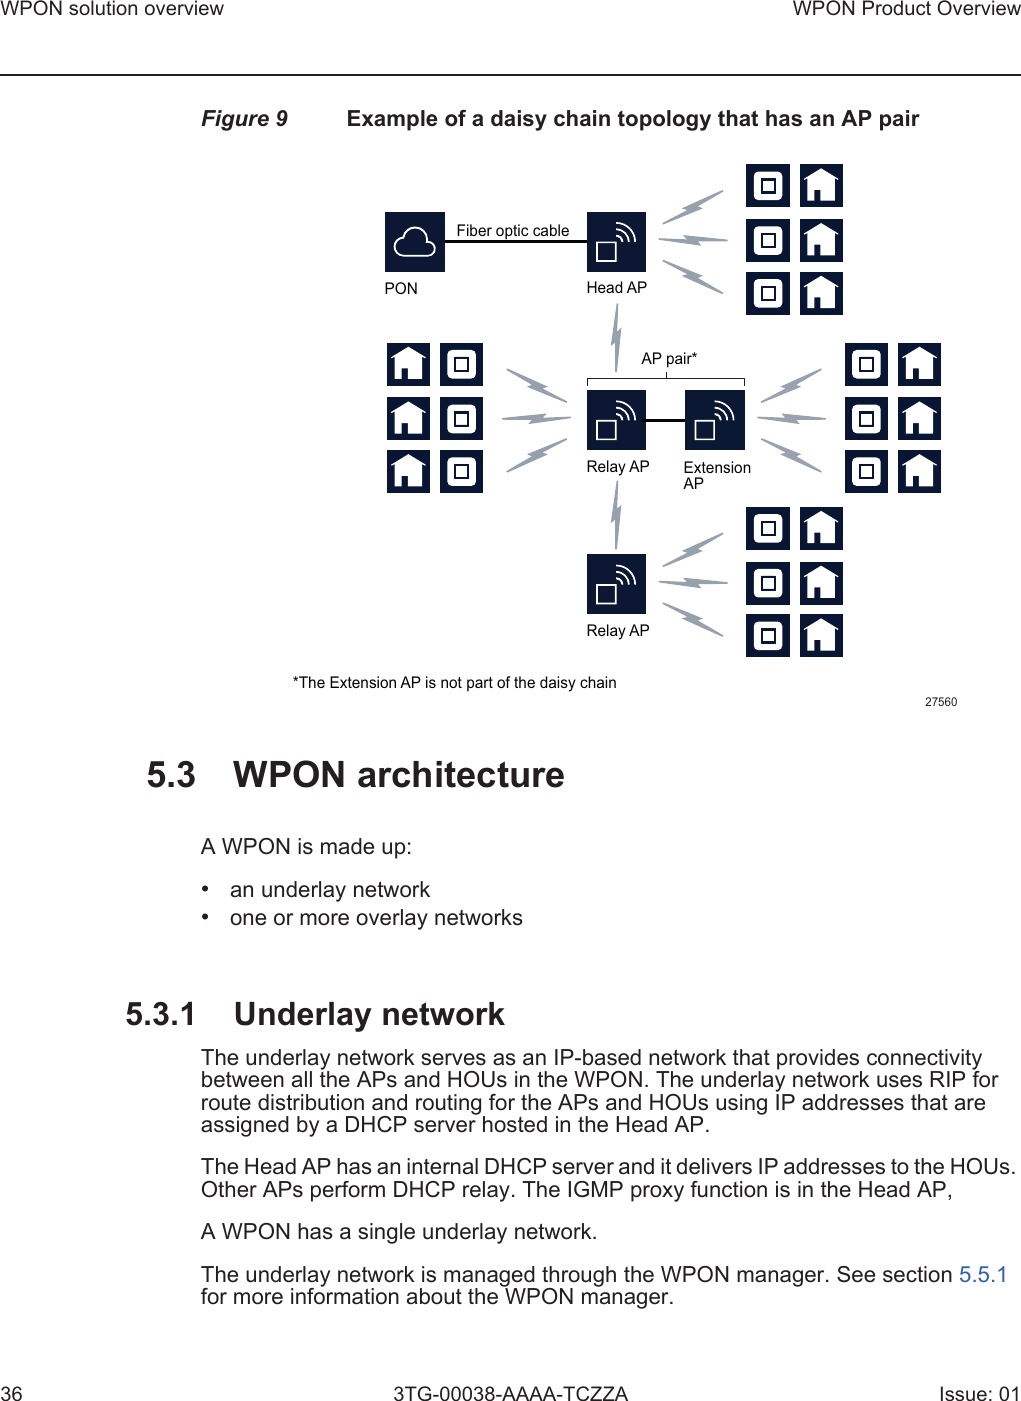 WPON solution overview36WPON Product Overview3TG-00038-AAAA-TCZZA Issue: 01Figure 9 Example of a daisy chain topology that has an AP pair5.3 WPON architectureA WPON is made up:•an underlay network•one or more overlay networks5.3.1 Underlay networkThe underlay network serves as an IP-based network that provides connectivity between all the APs and HOUs in the WPON. The underlay network uses RIP for route distribution and routing for the APs and HOUs using IP addresses that are assigned by a DHCP server hosted in the Head AP. The Head AP has an internal DHCP server and it delivers IP addresses to the HOUs. Other APs perform DHCP relay. The IGMP proxy function is in the Head AP,A WPON has a single underlay network.The underlay network is managed through the WPON manager. See section 5.5.1 for more information about the WPON manager.Head APPONFiber optic cable27560Relay APRelay AP ExtensionAPAP pair**The Extension AP is not part of the daisy chain